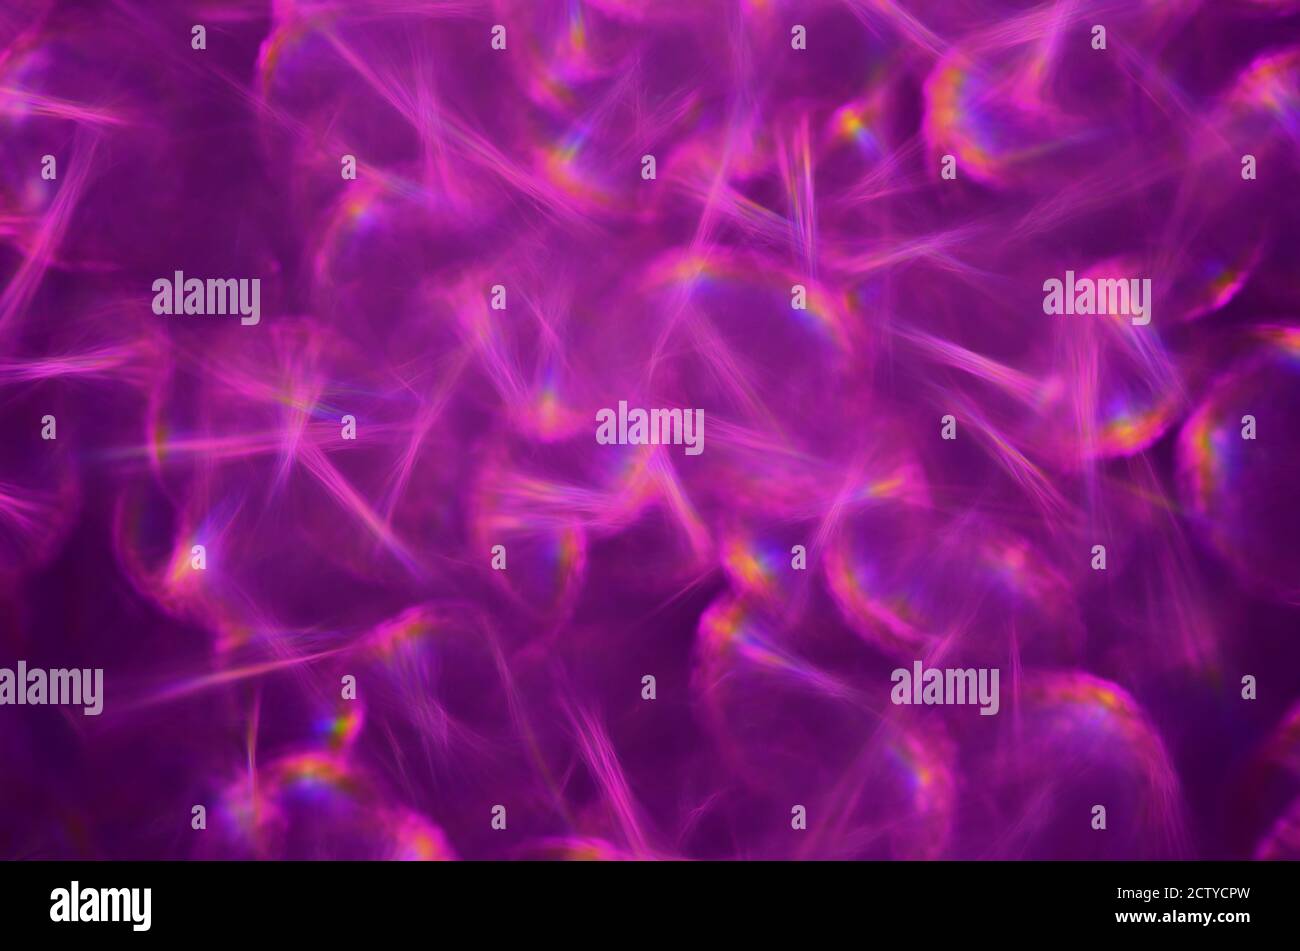 Flickering abstract background with defocused purple light. Stock Photo